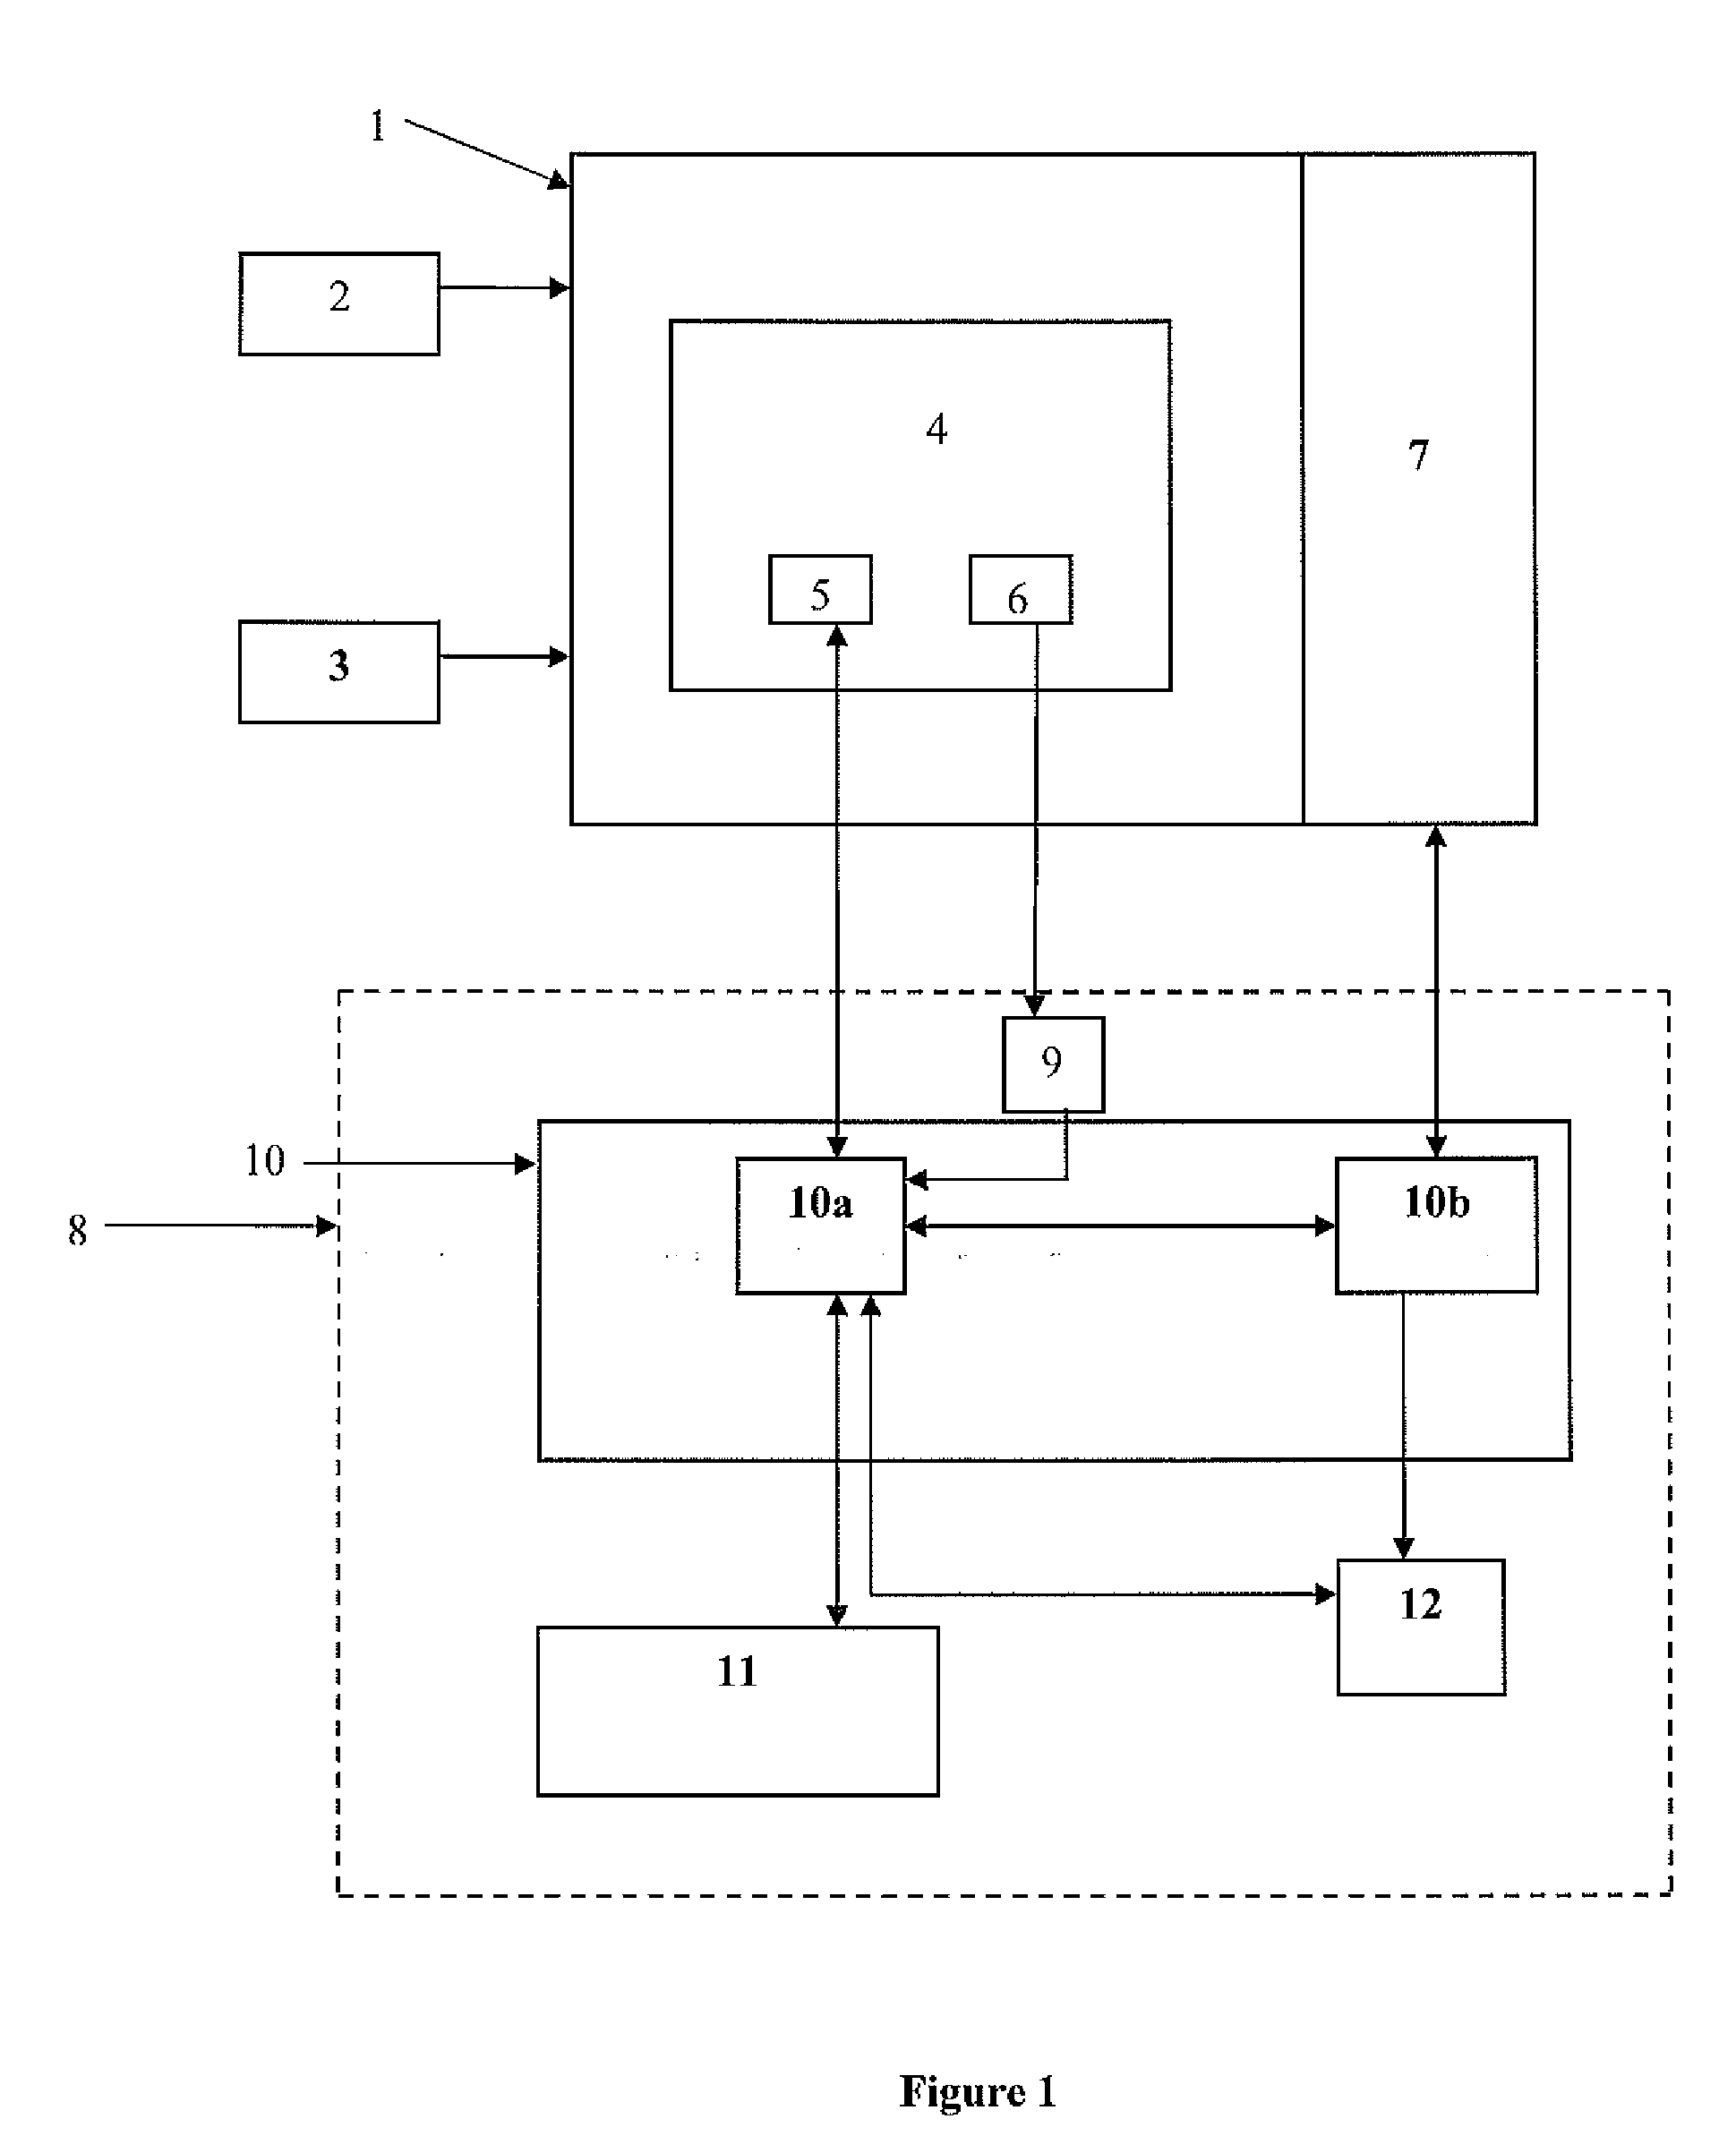 Apparatus and Method for Managing Bank Account Services, Advertisement Delivery and Reward Points